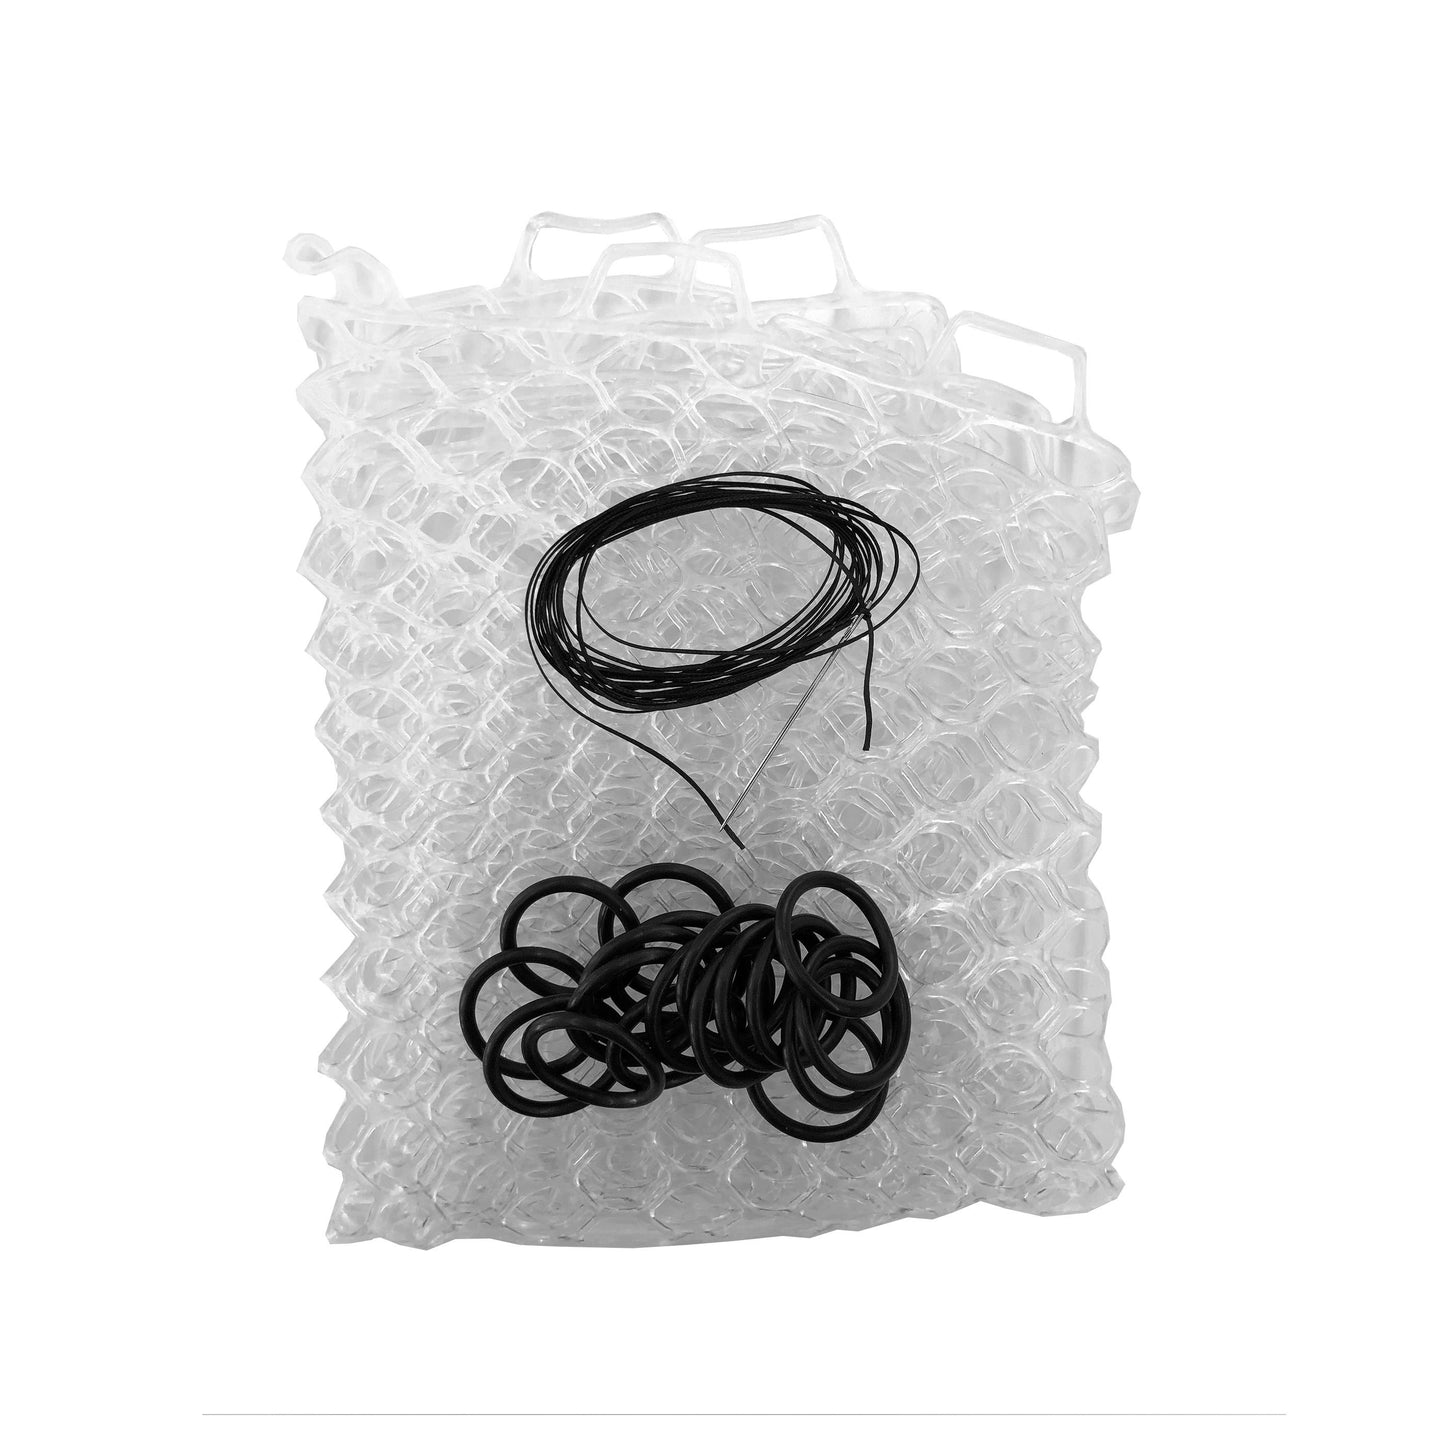 Fishpond Nomad Replacement Rubber Net - Clear - 19 in